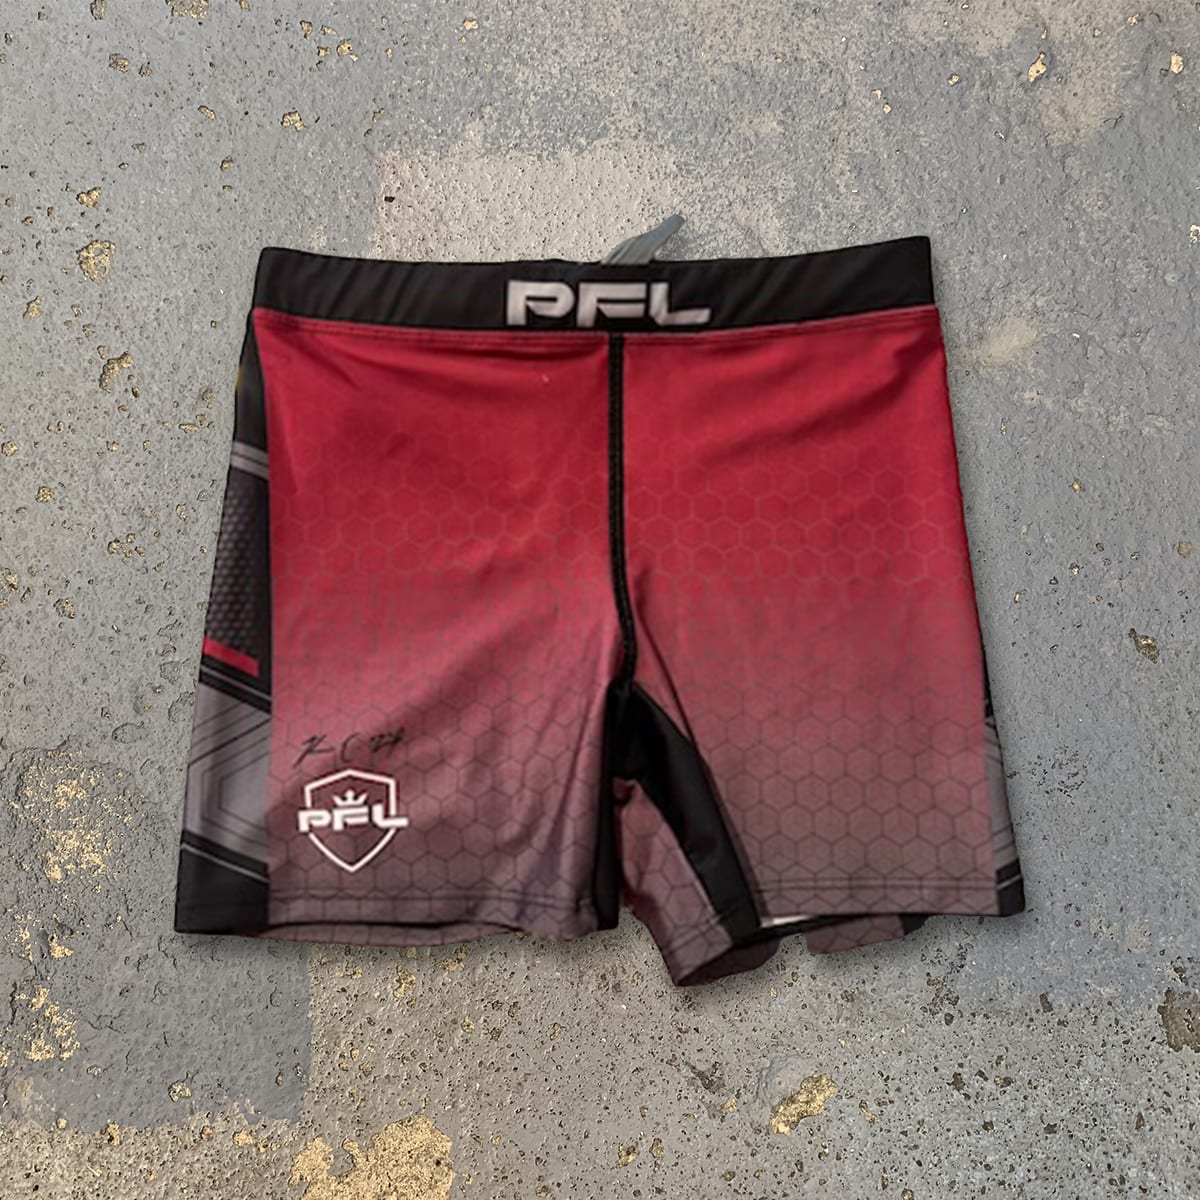 PFL Shorts Red AUTOGRAPHED & Worn by Kaytlin Neil